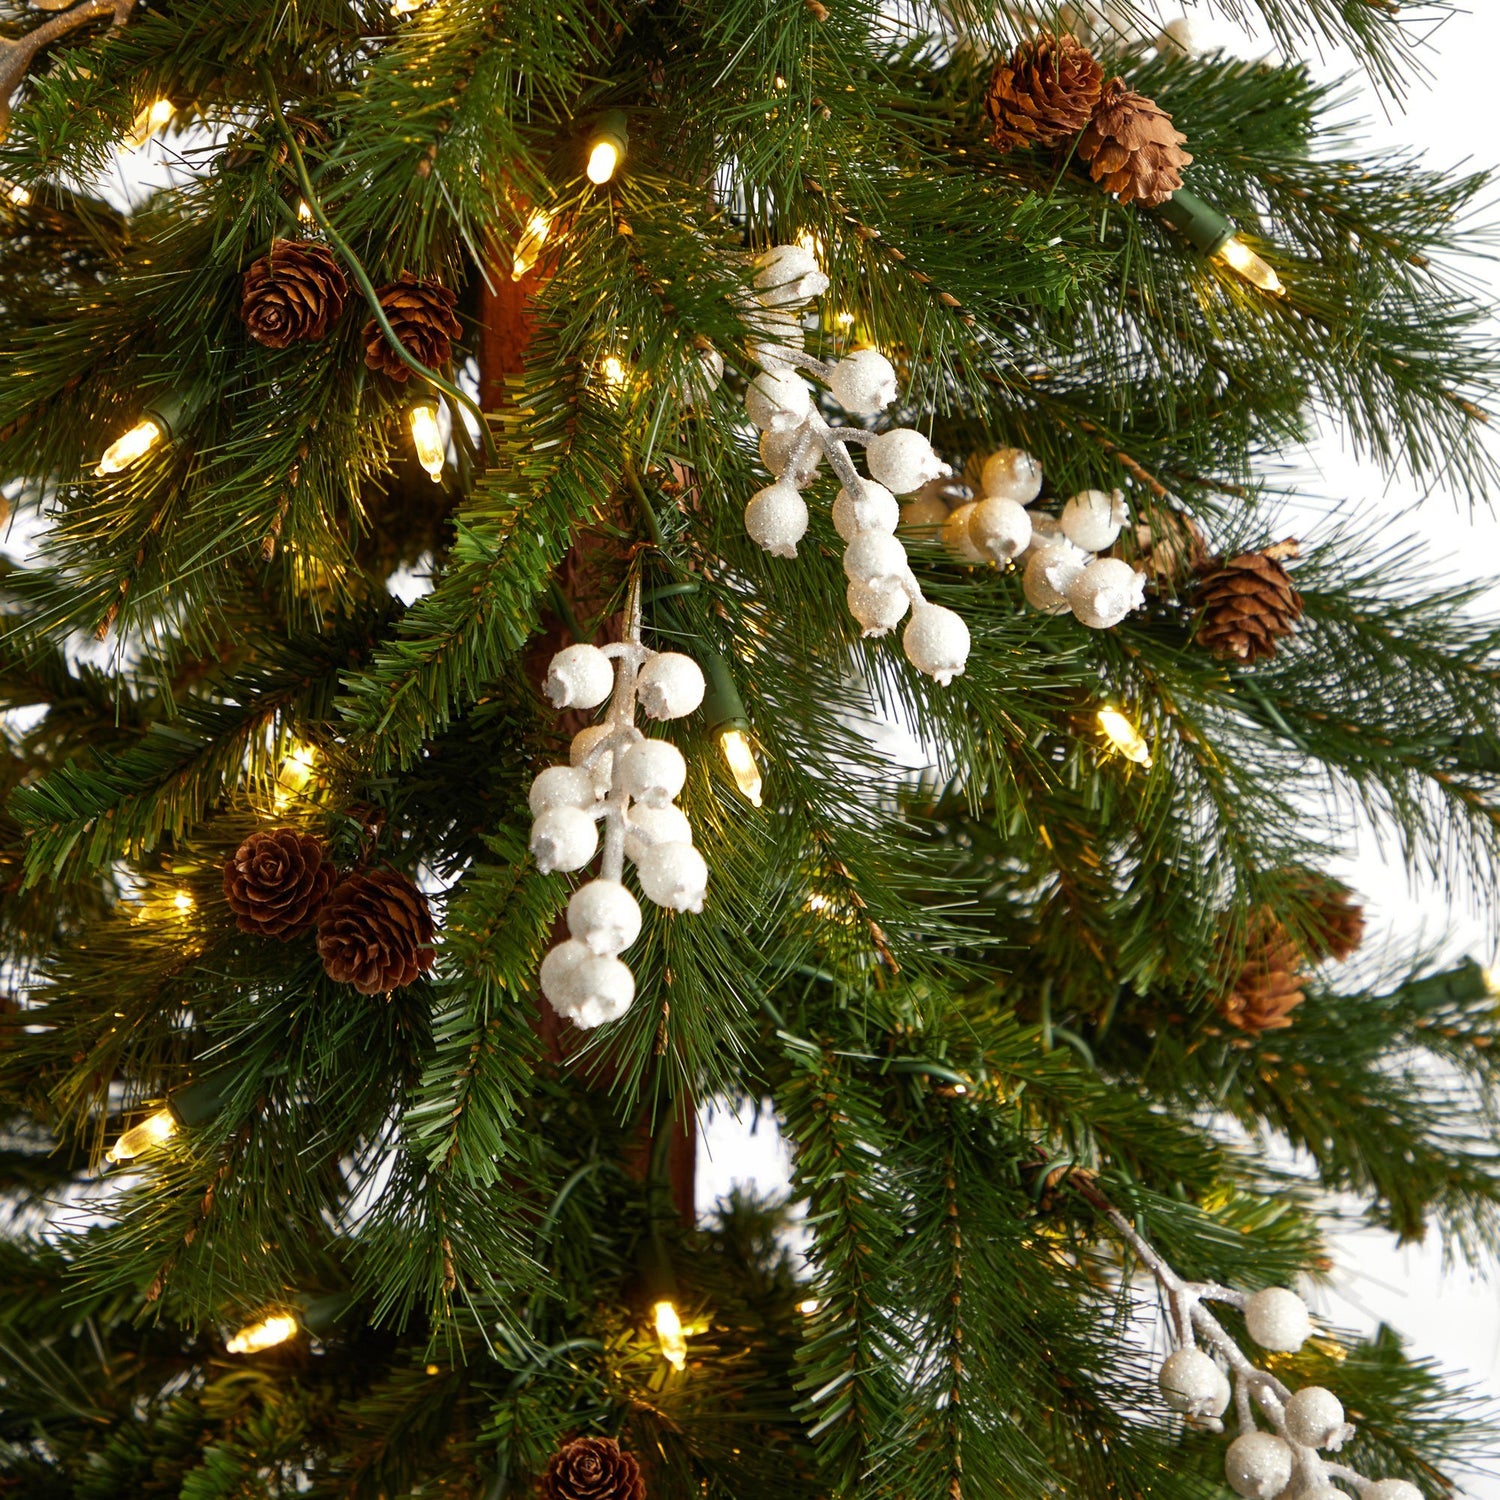 6' Alpine Artificial Christmas Tree with Pinecones, Berries and 200 White Warm LED Lights